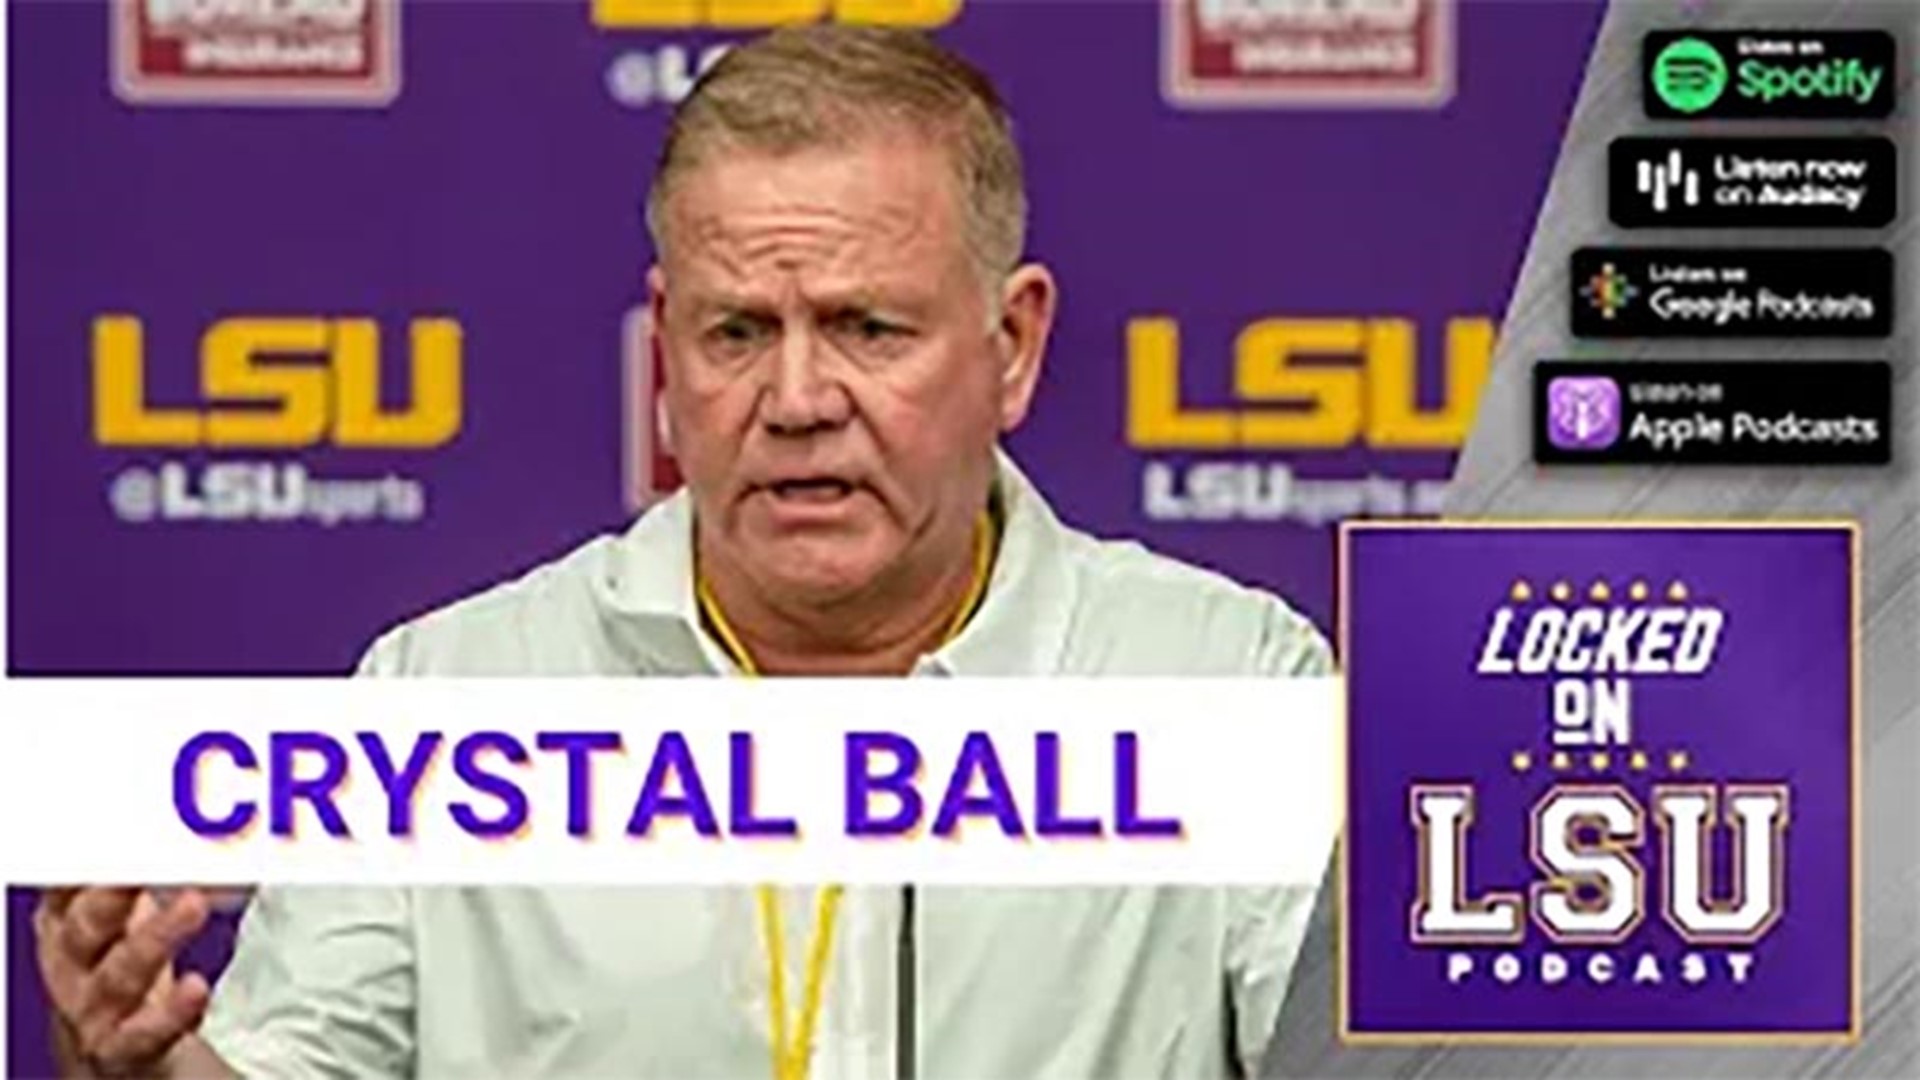 While we talk a lot about the expectations of LSU football in 2022, I don't have the conversation enough about where this team will be and could be in the next 3 yrs